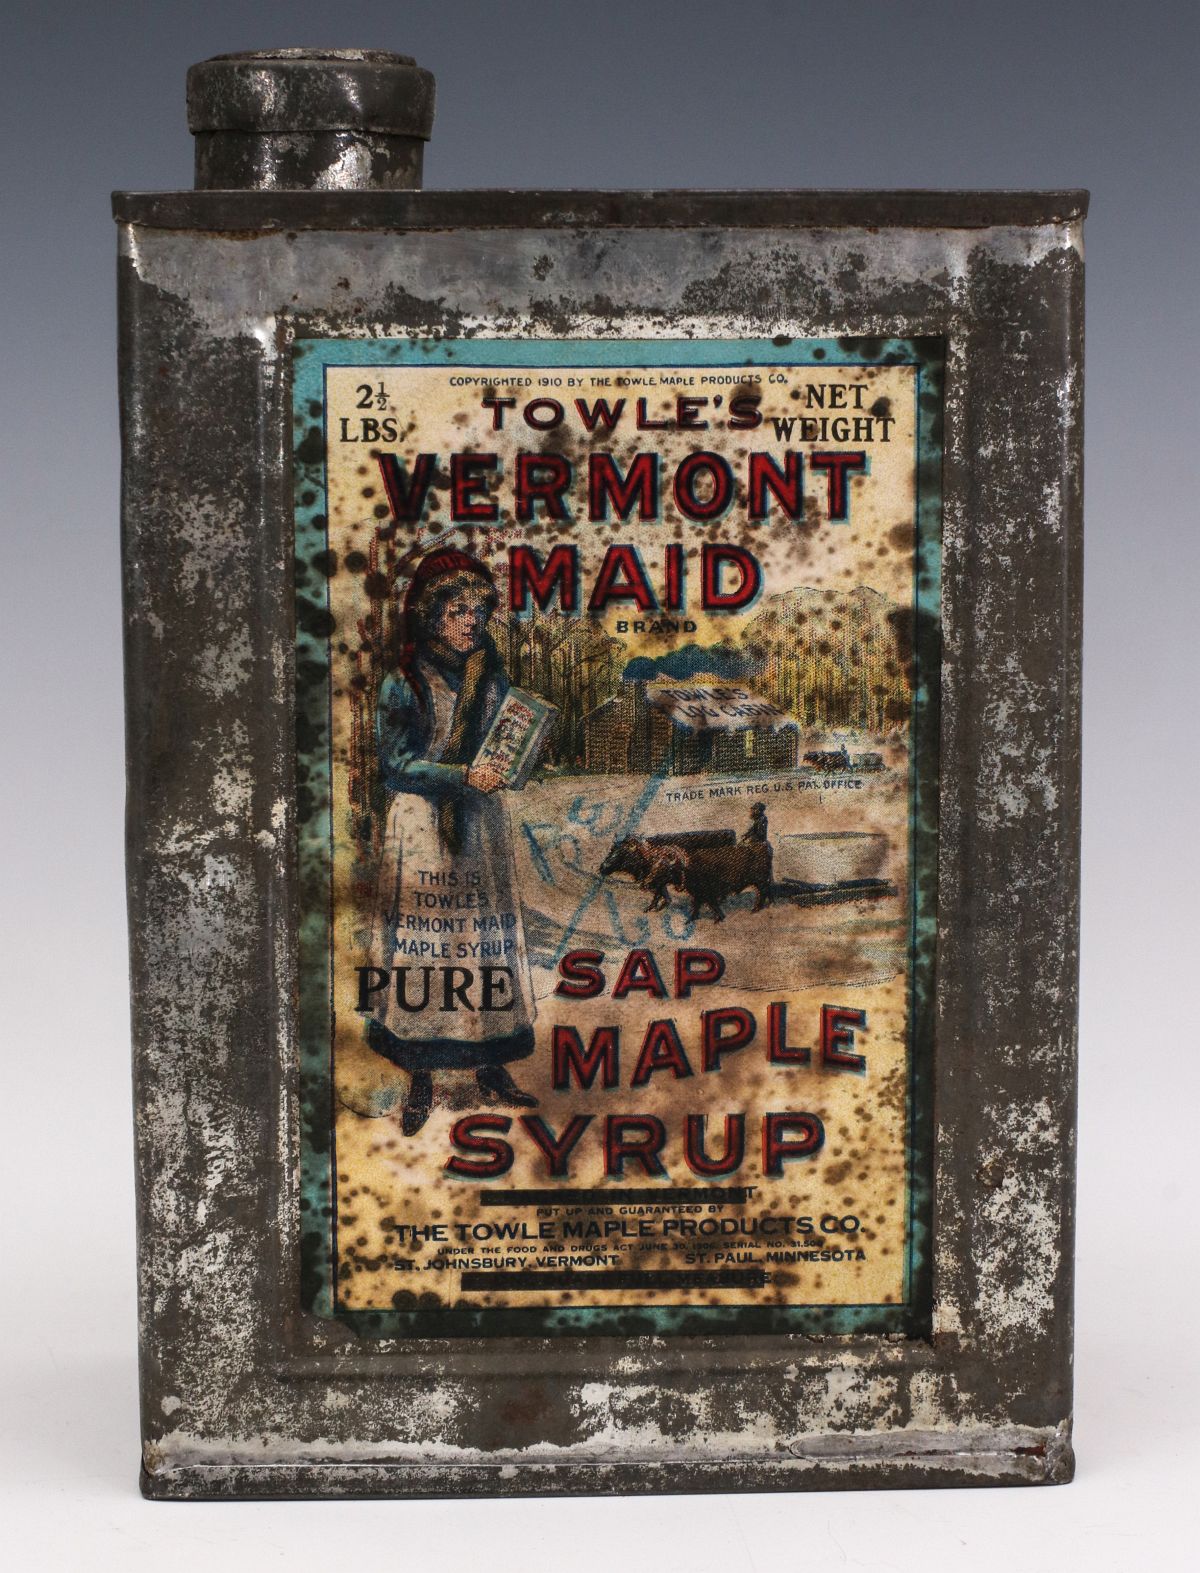 A SYRUP TIN TOWLE'S VERMONT MAID SAP MAPLE SYRUP